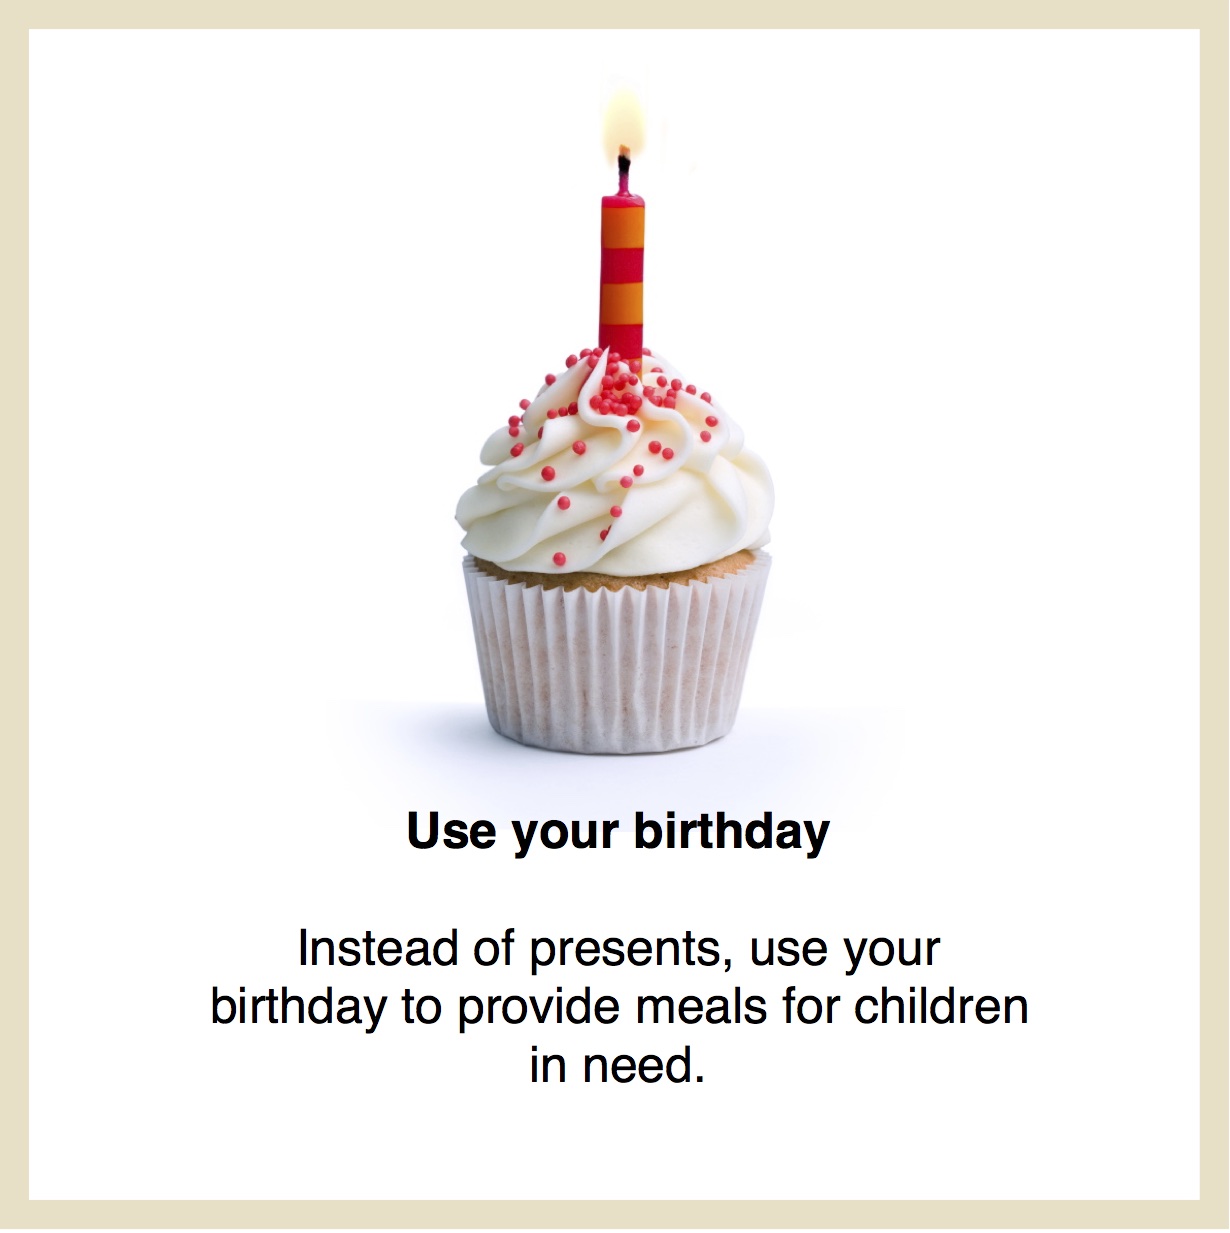 Give your birthday